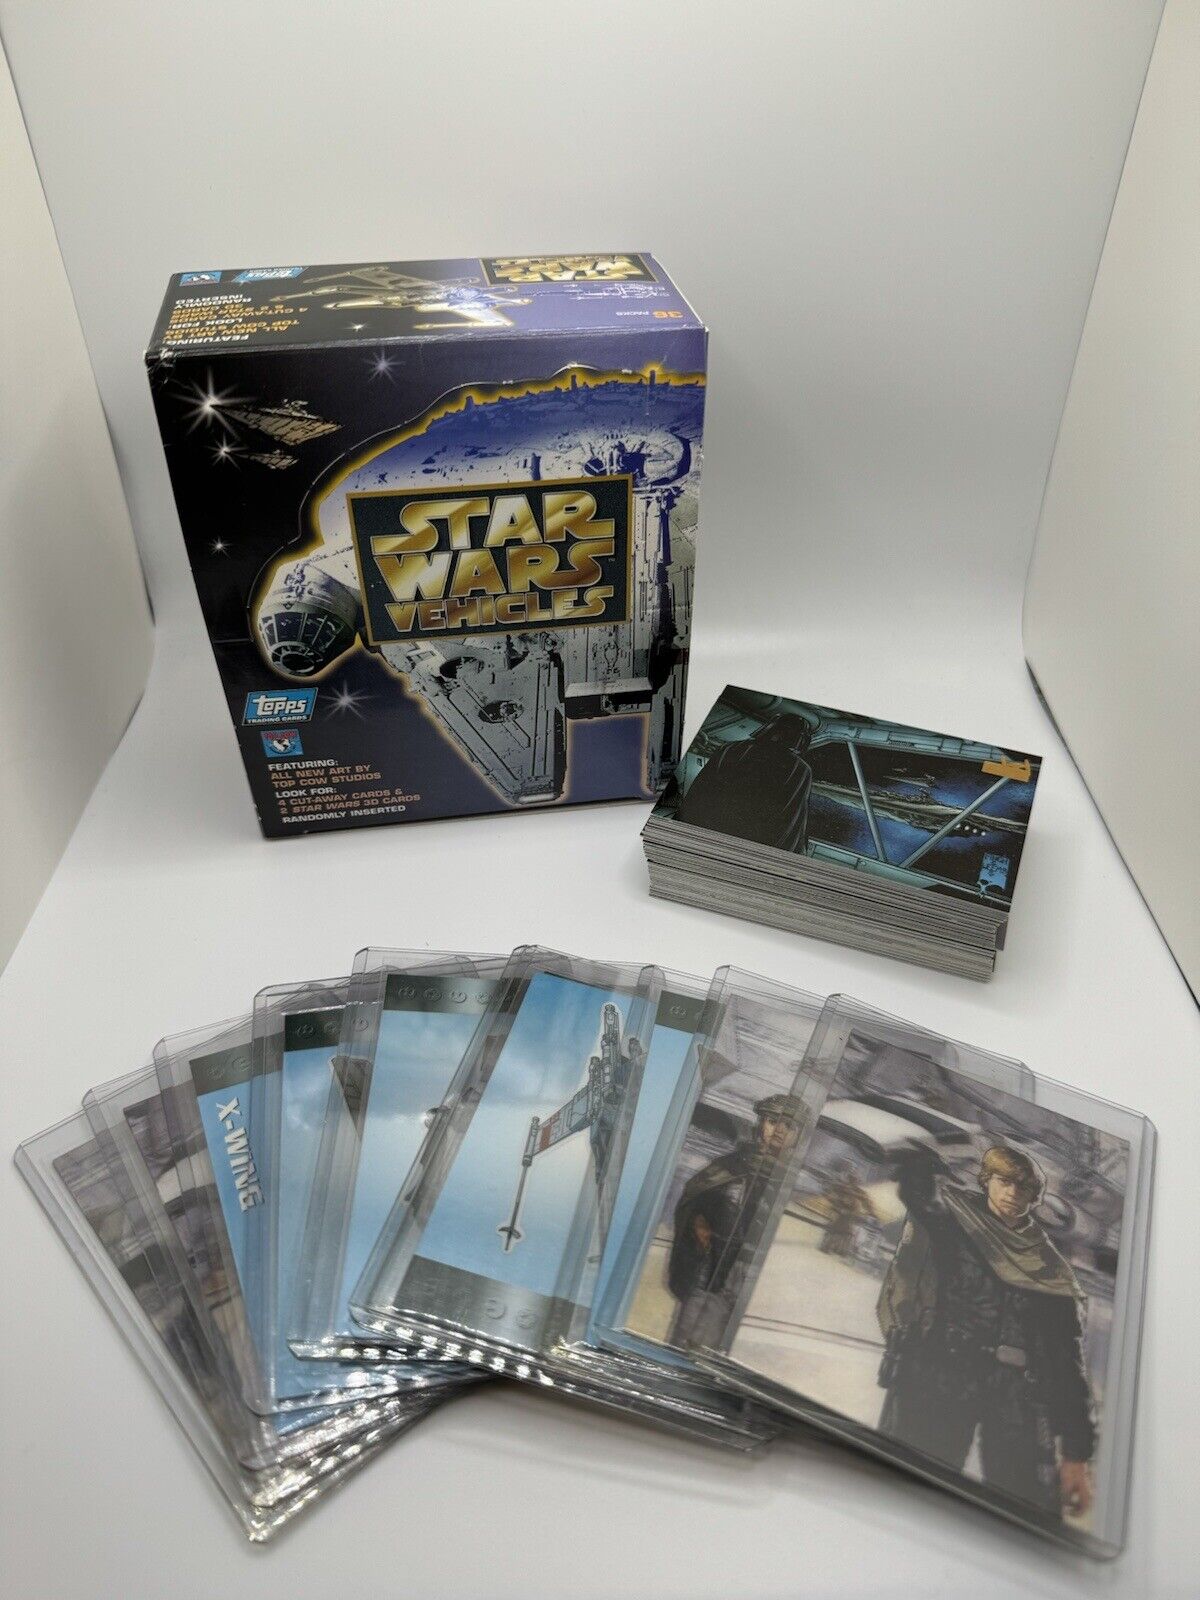 Star Wars Vehicles Trading Cards Topps 1997 Complete set and extras